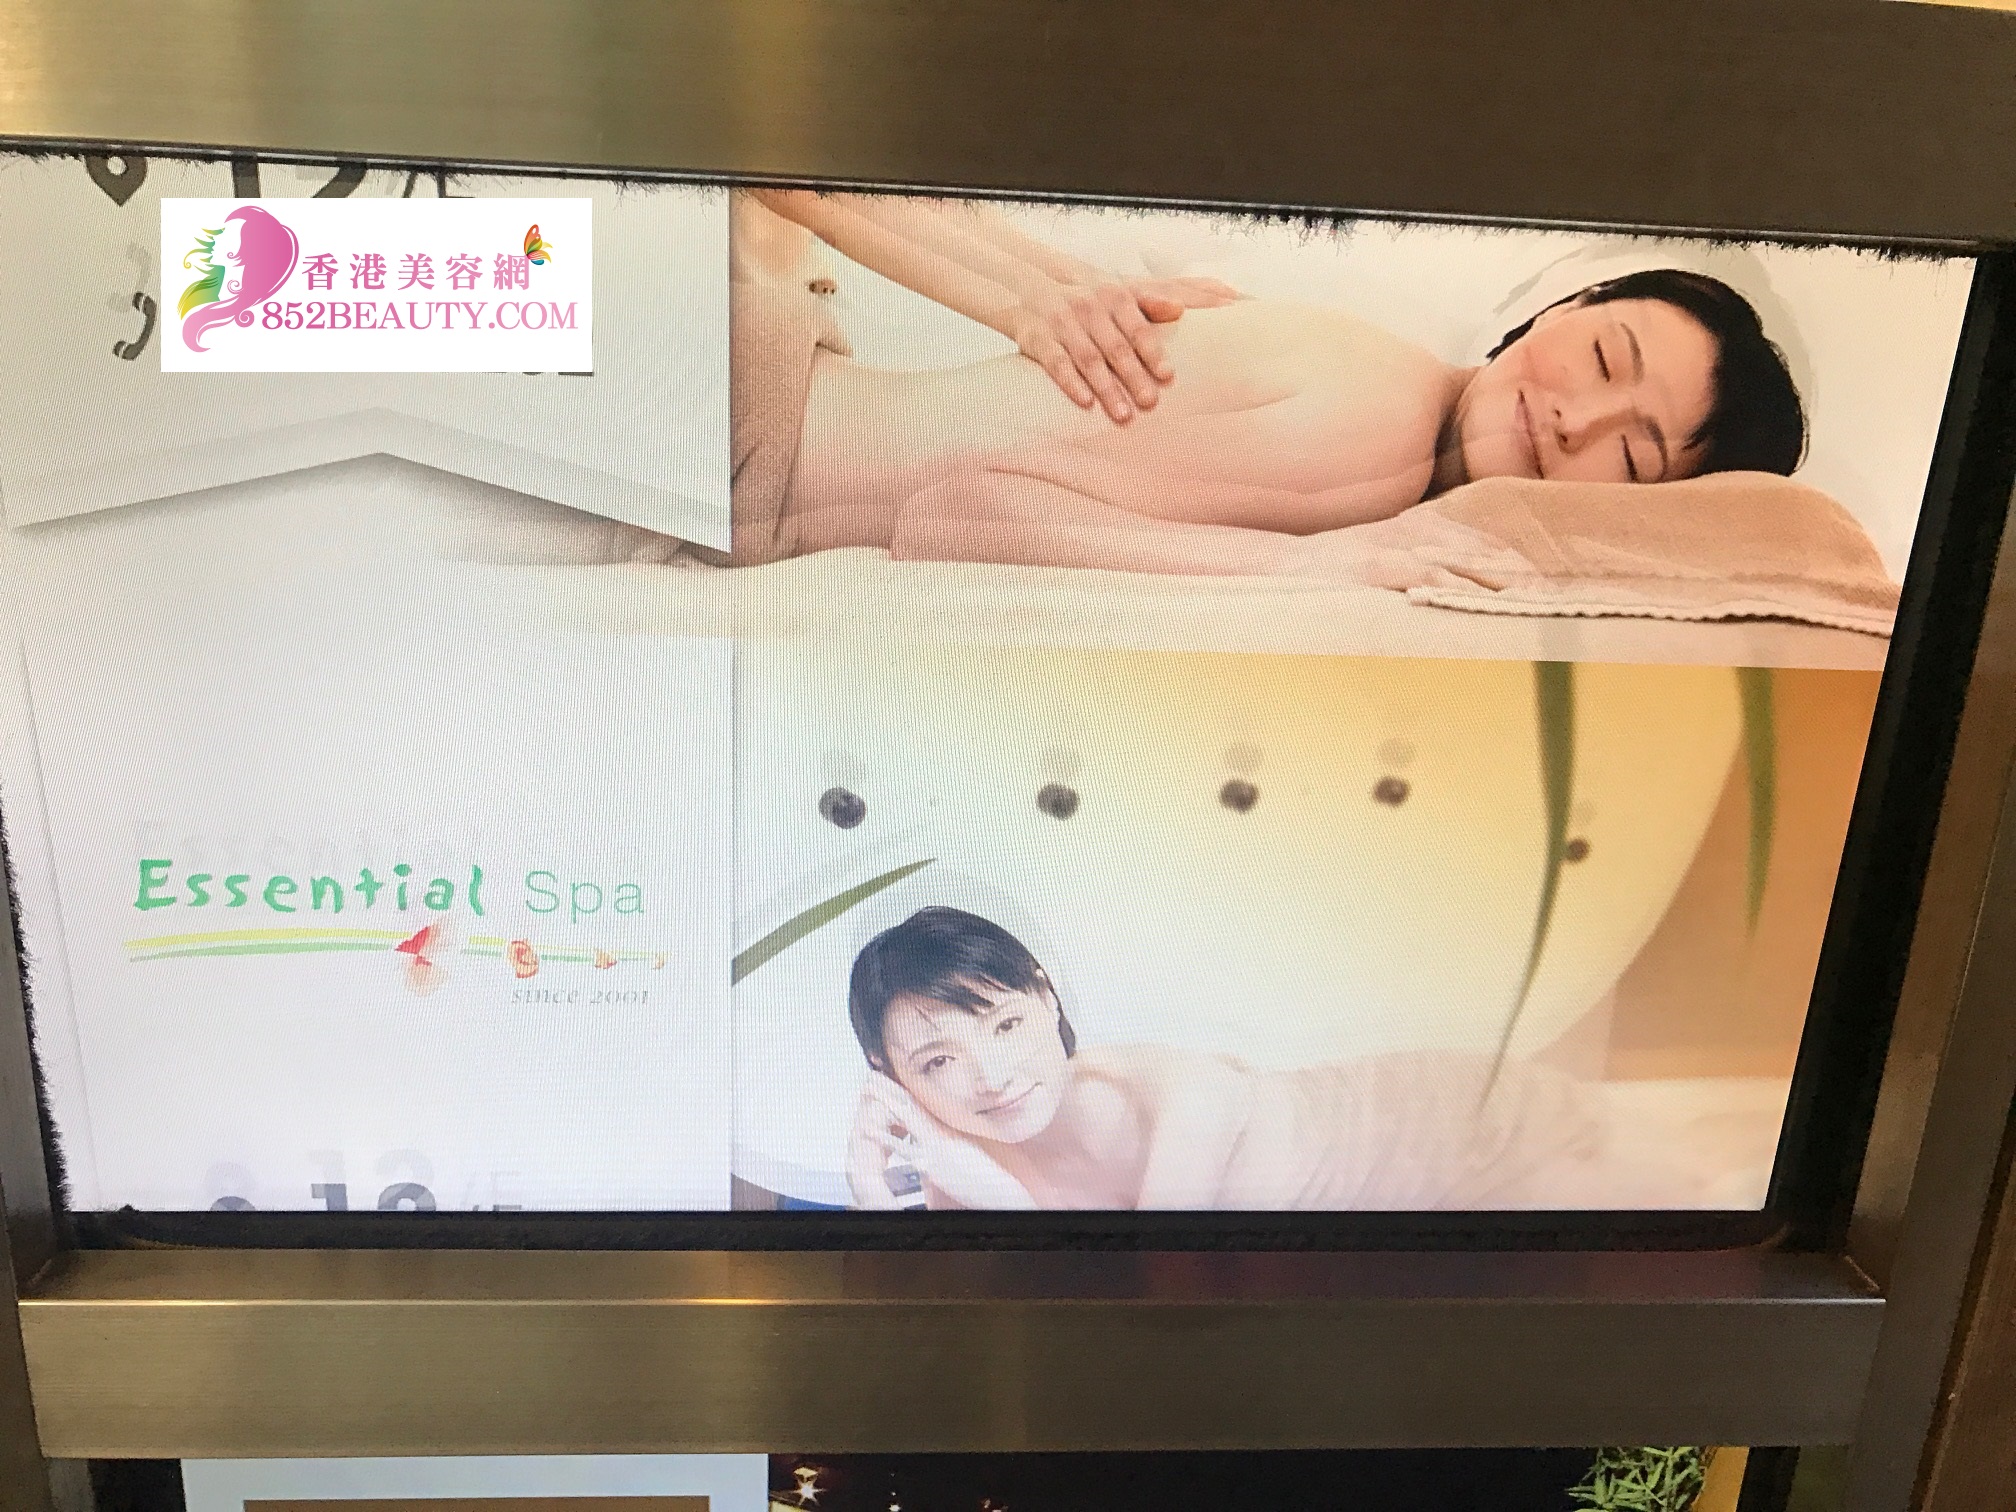 Hand and foot care: Essential SPA (伊利近街)